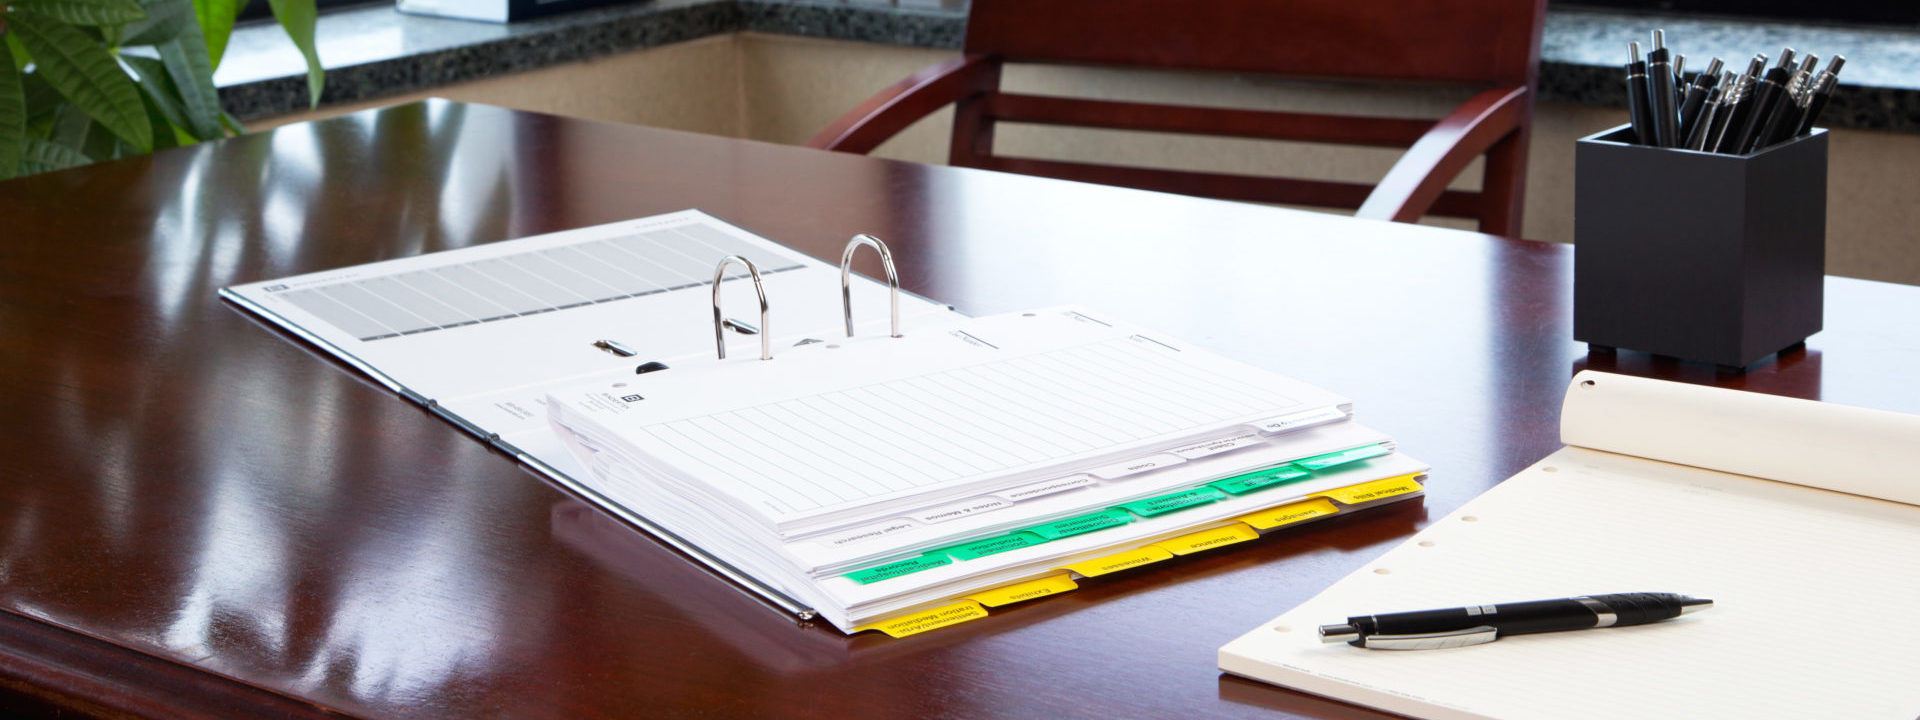 How to Organize a Binder for Maximum Productivity